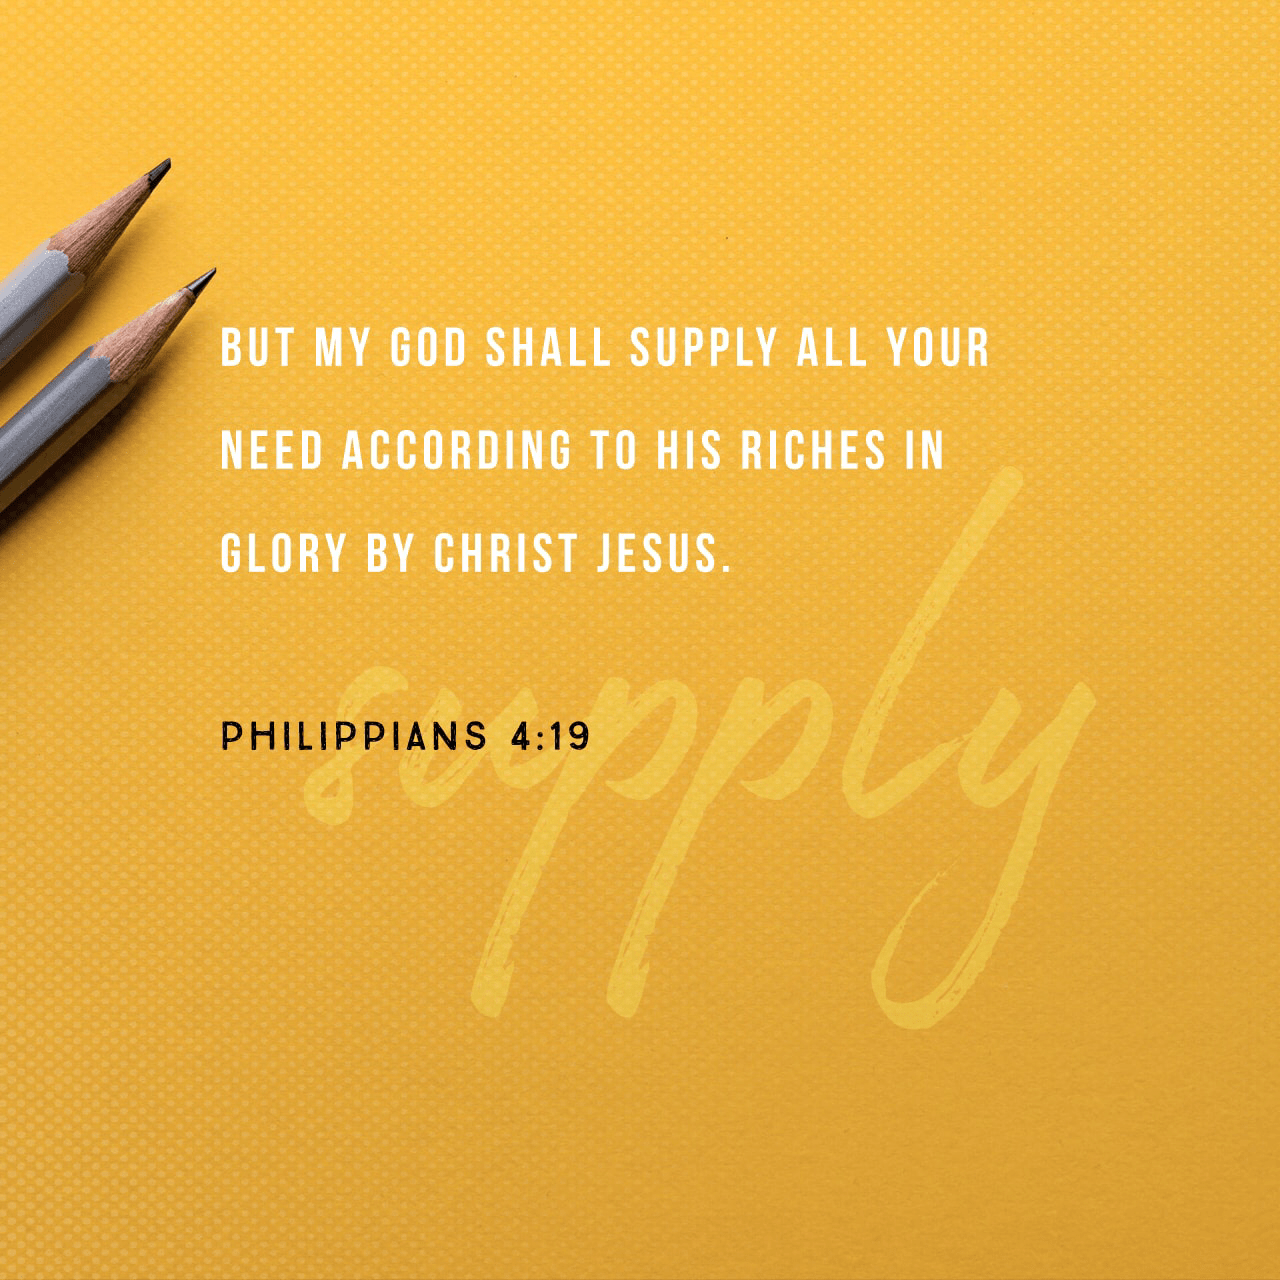 VOTD September 1 - And my God will supply all your needs according to His riches in glory in Christ Jesus. Philippians‬ ‭4:19‬ ‭NASB‬‬